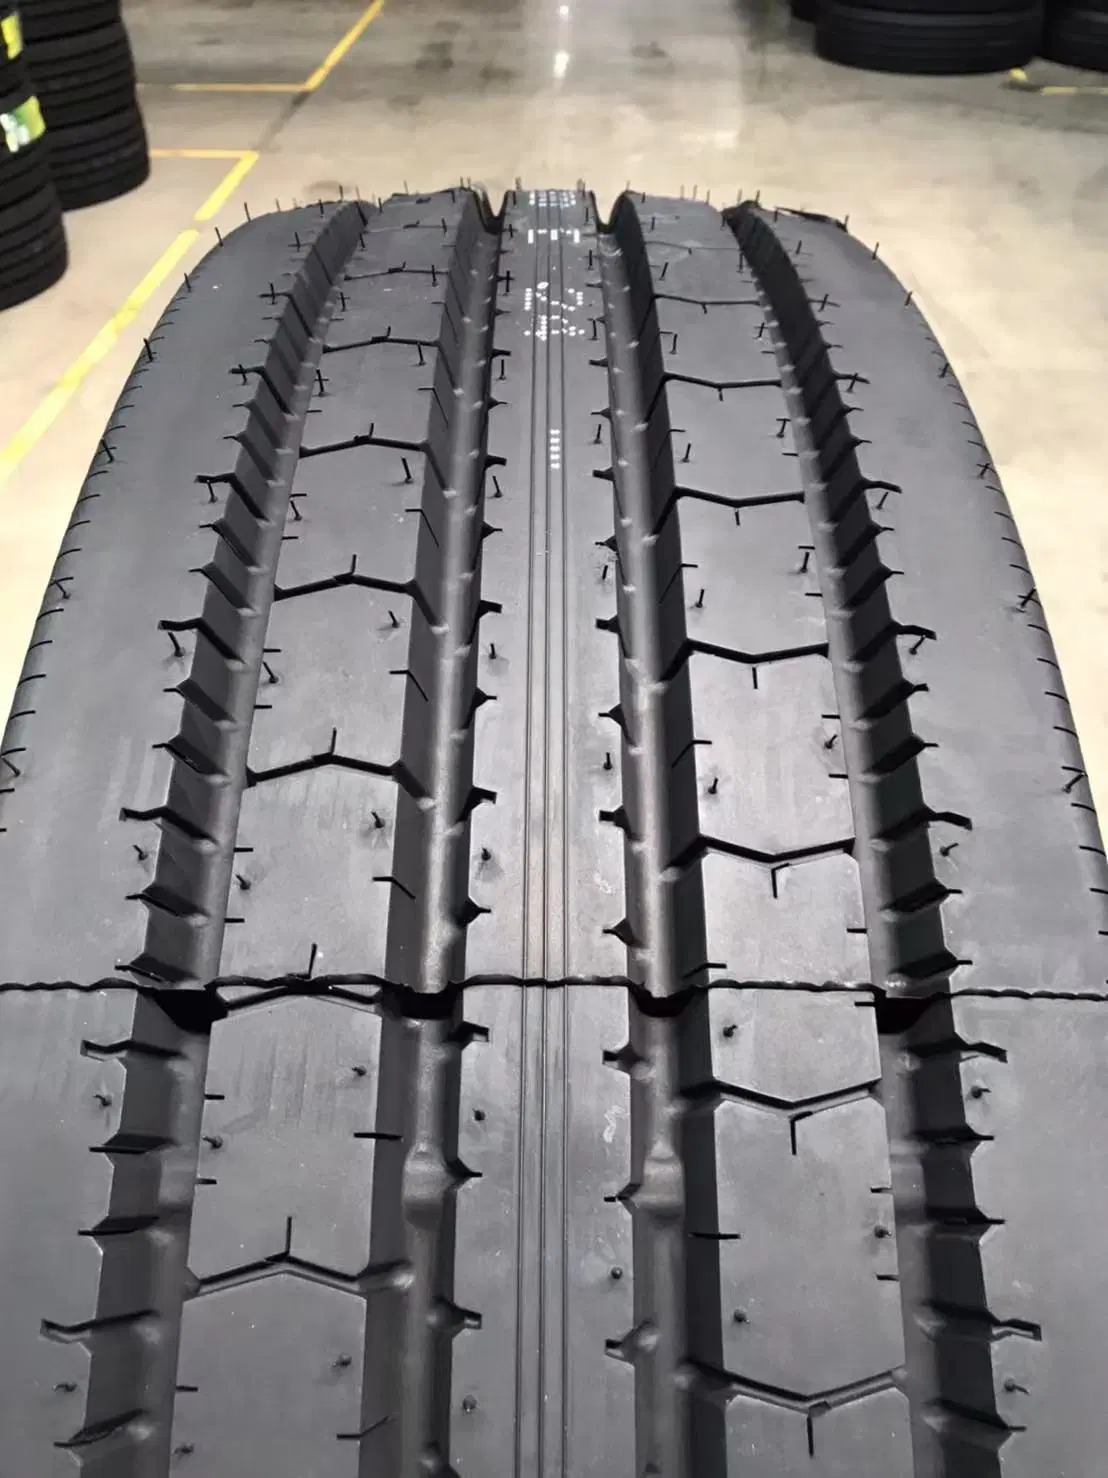 Inner Tube truck TBR OTR tyres rib pattern low pressure mixed pavement tire with superb wear resistant and heat dissipation competitive price high quality tires